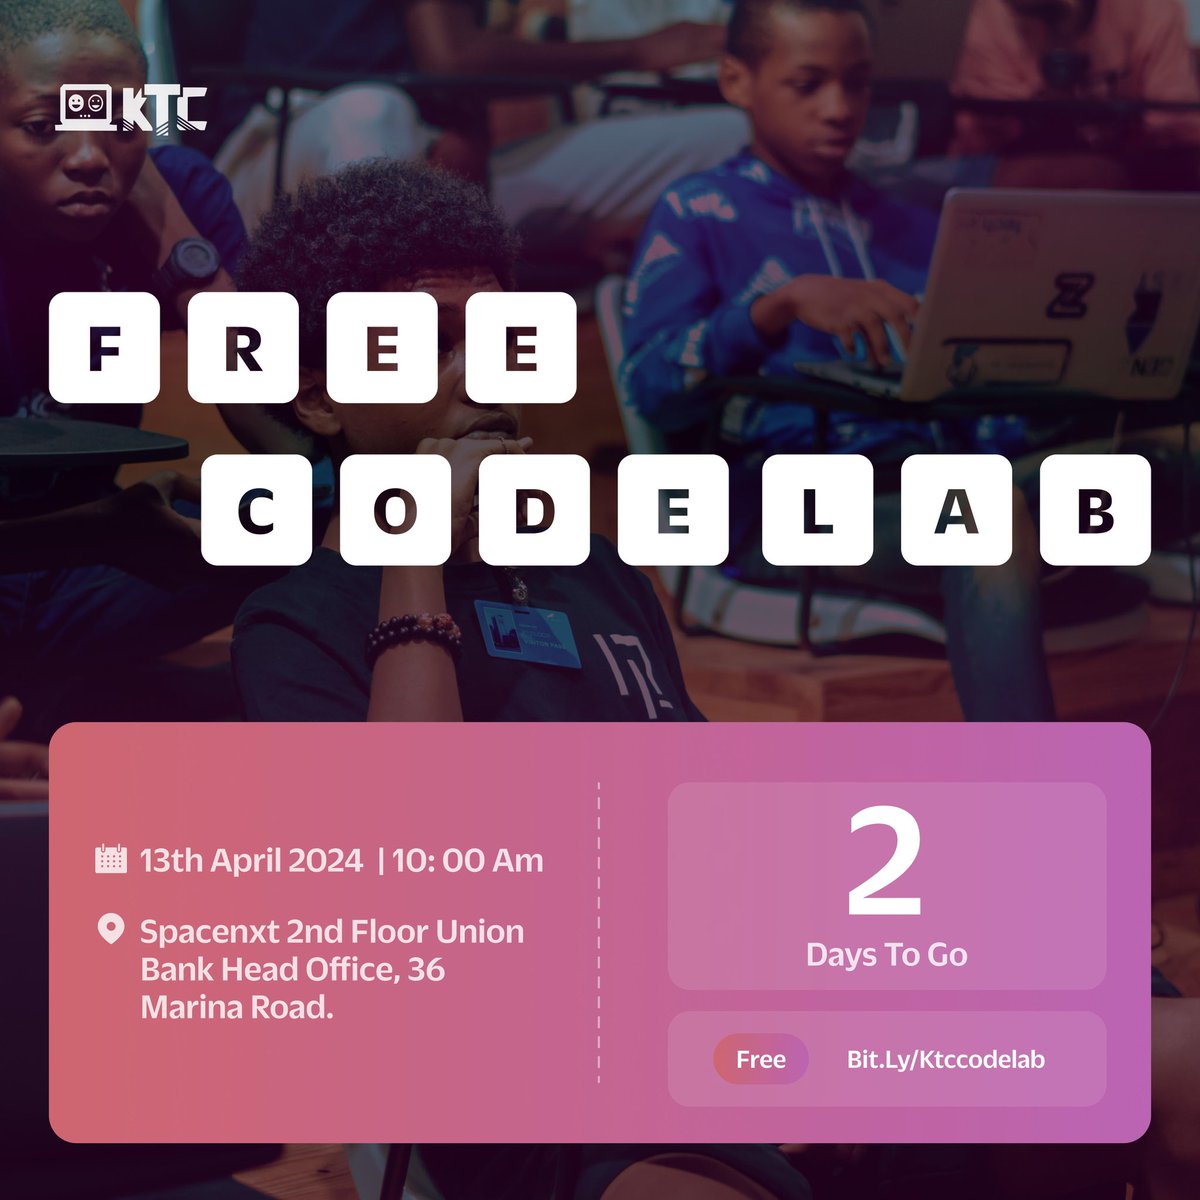 Quick Reminder🚀

Join us on Saturday, 13th for our Kidsthatcode FREE CODE LAB 

Click the link to Register👇🏻
bit.ly/ktccodelab

Get ready to learn, create and build . 

See you there! 👀

#kidsintech